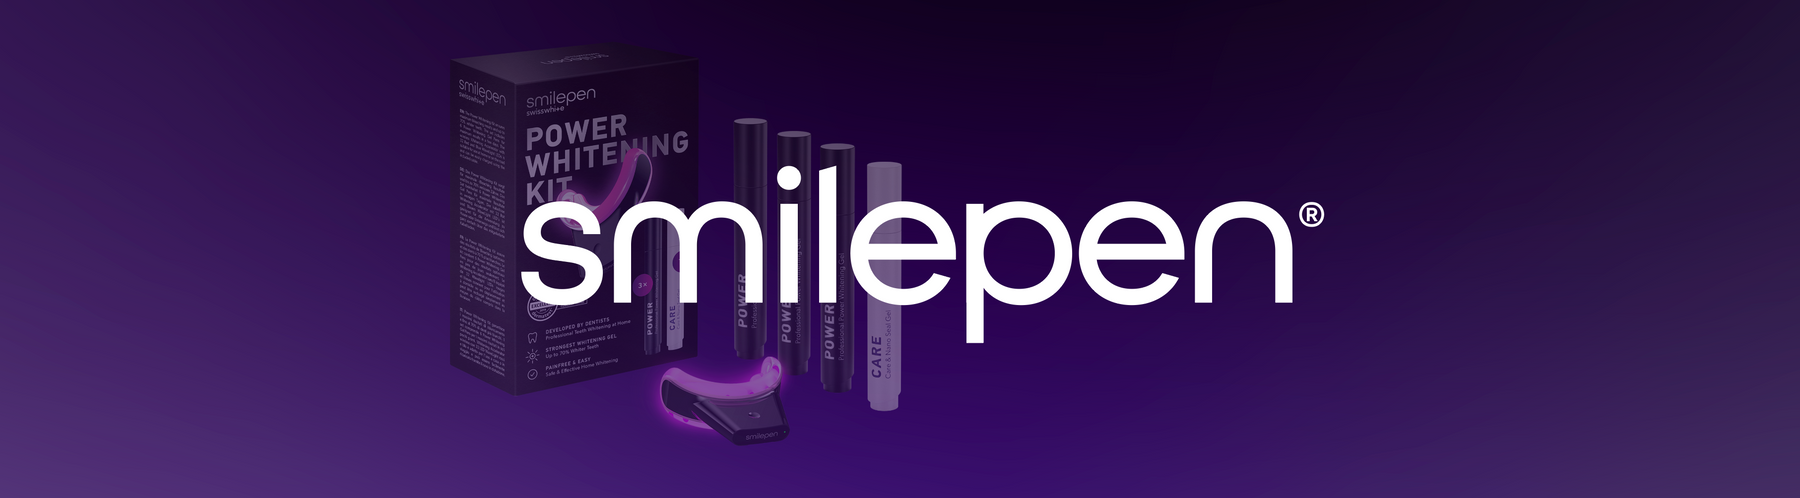 Oral Science launches SmilePen, the First Pain-Free PAP Home-Care Whitening Available to Dental Professionals